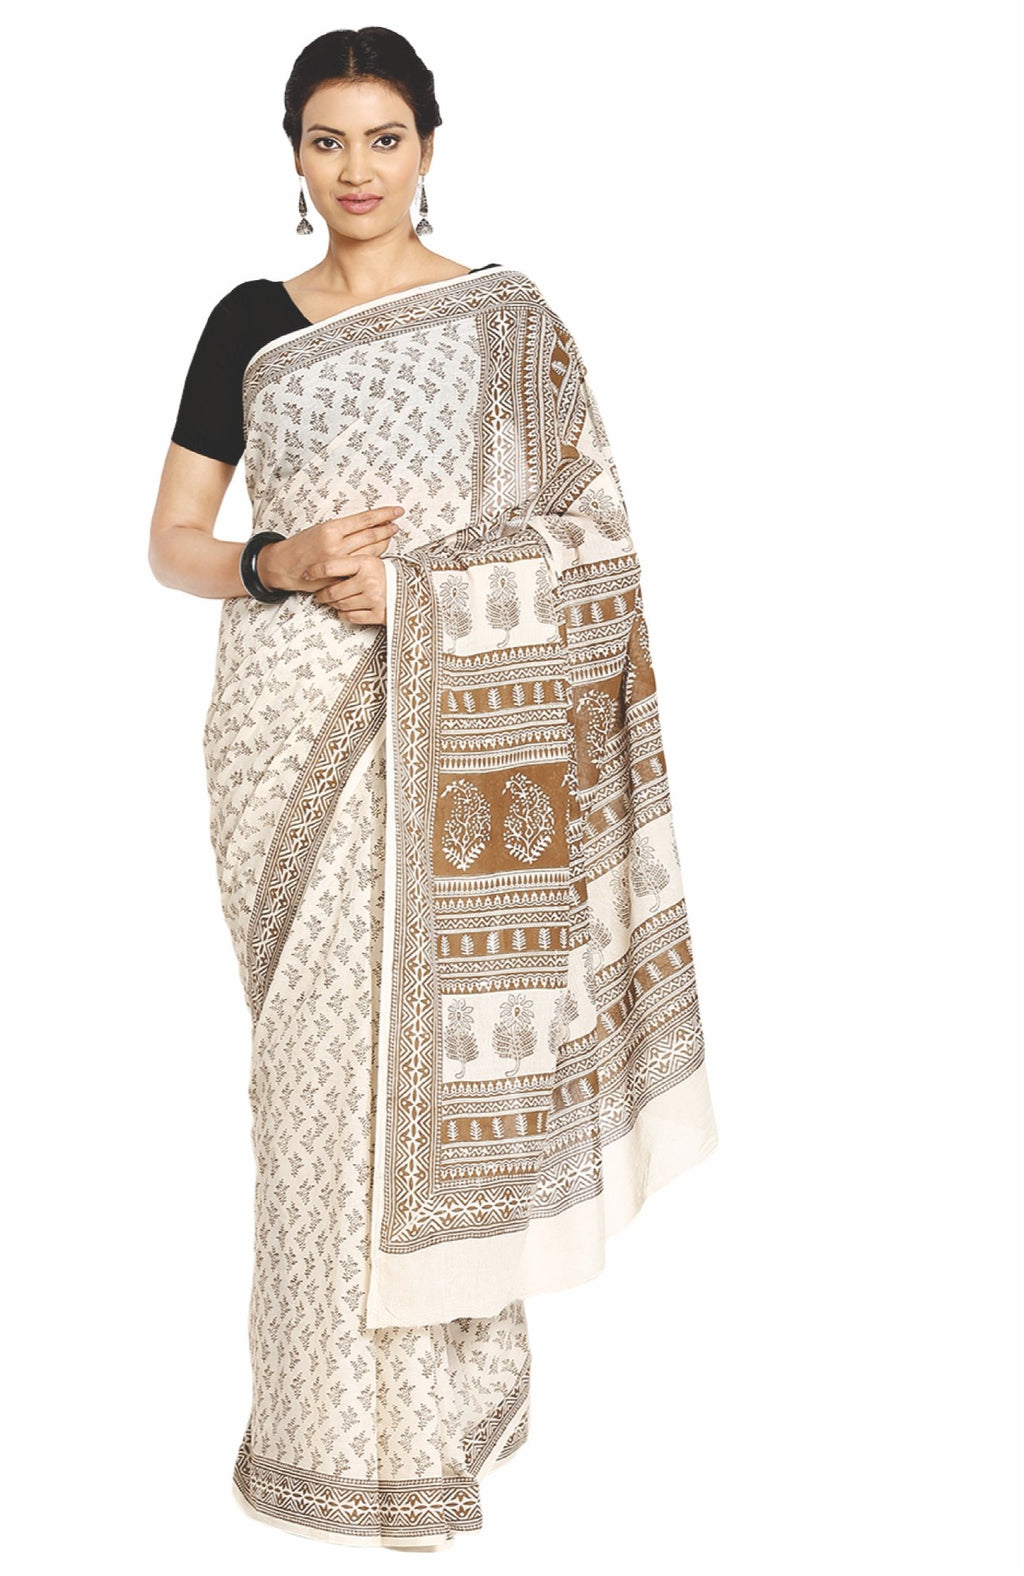 Off-White Cotton Hand Block Bagh Print Handcrafted Saree-Saree-Kalakari India-ZIBASA0039-Bagh, Cotton, Geographical Indication, Hand Blocks, Hand Crafted, Heritage Prints, Natural Dyes, Sarees, Sustainable Fabrics-[Linen,Ethnic,wear,Fashionista,Handloom,Handicraft,Indigo,blockprint,block,print,Cotton,Chanderi,Blue, latest,classy,party,bollywood,trendy,summer,style,traditional,formal,elegant,unique,style,hand,block,print, dabu,booti,gift,present,glamorous,affordable,collectible,Sari,Saree,printed